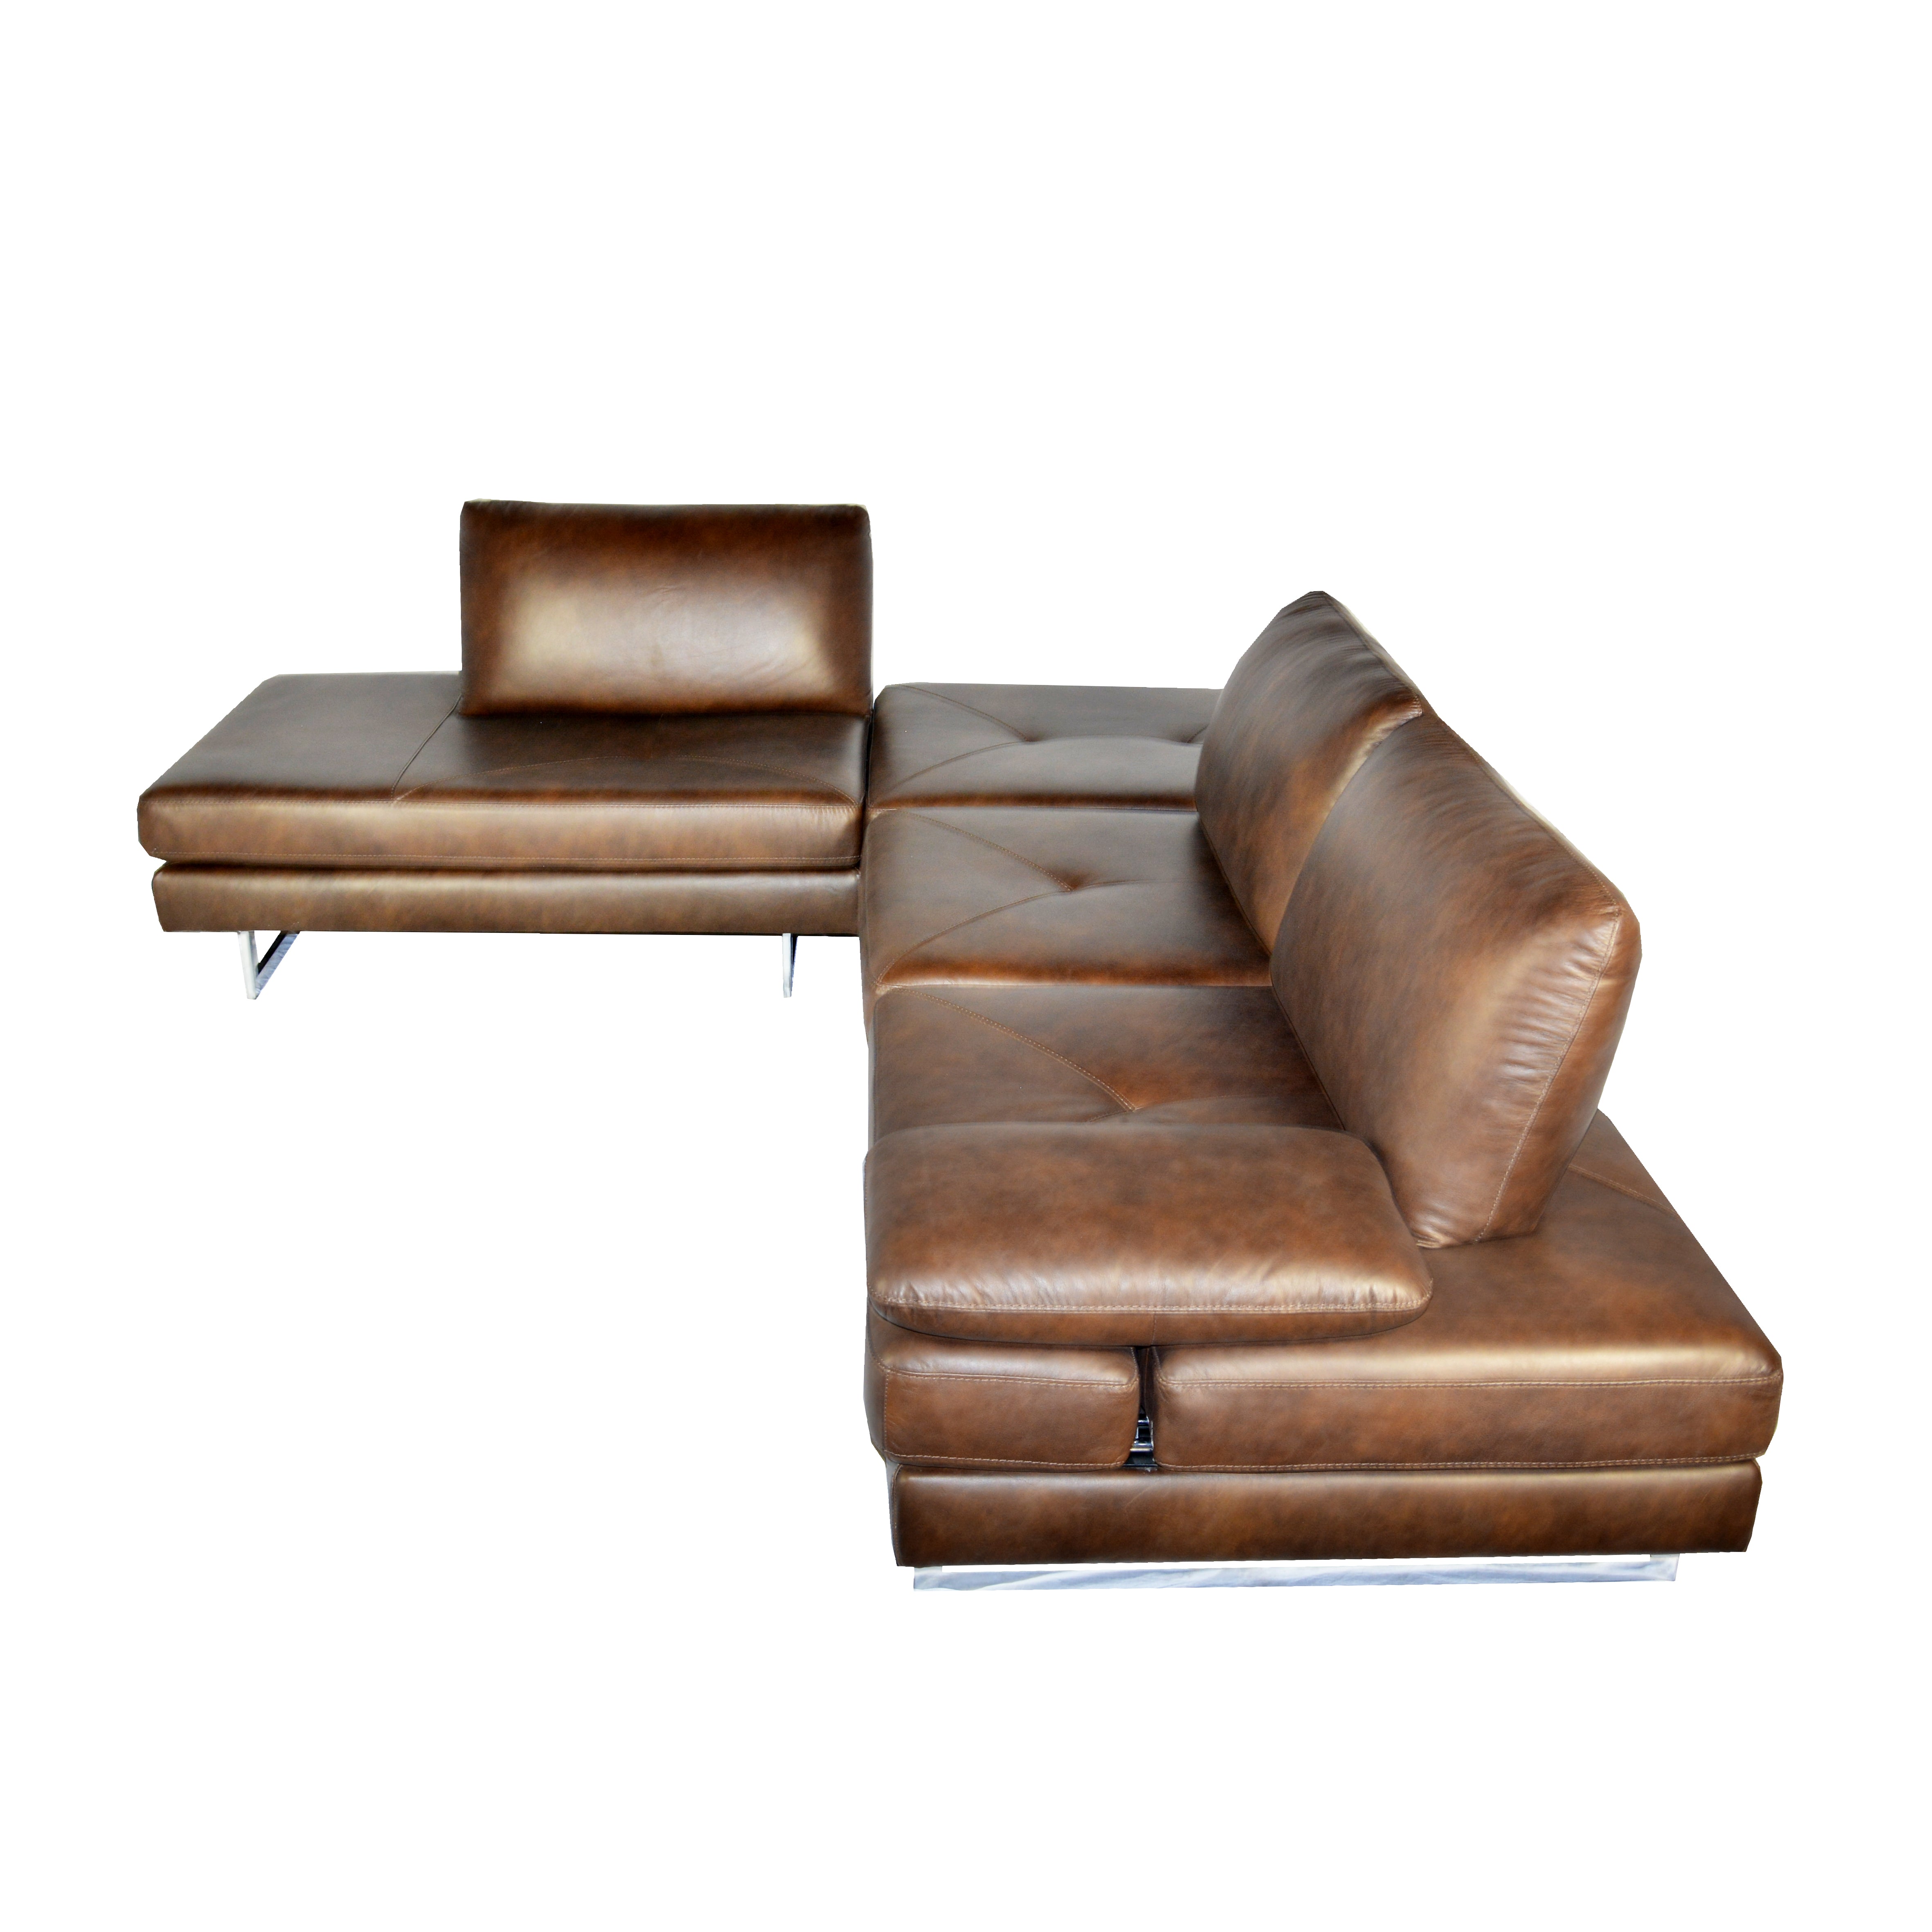 DAY NIGHT Sectional Sofa in Leather by Castilla